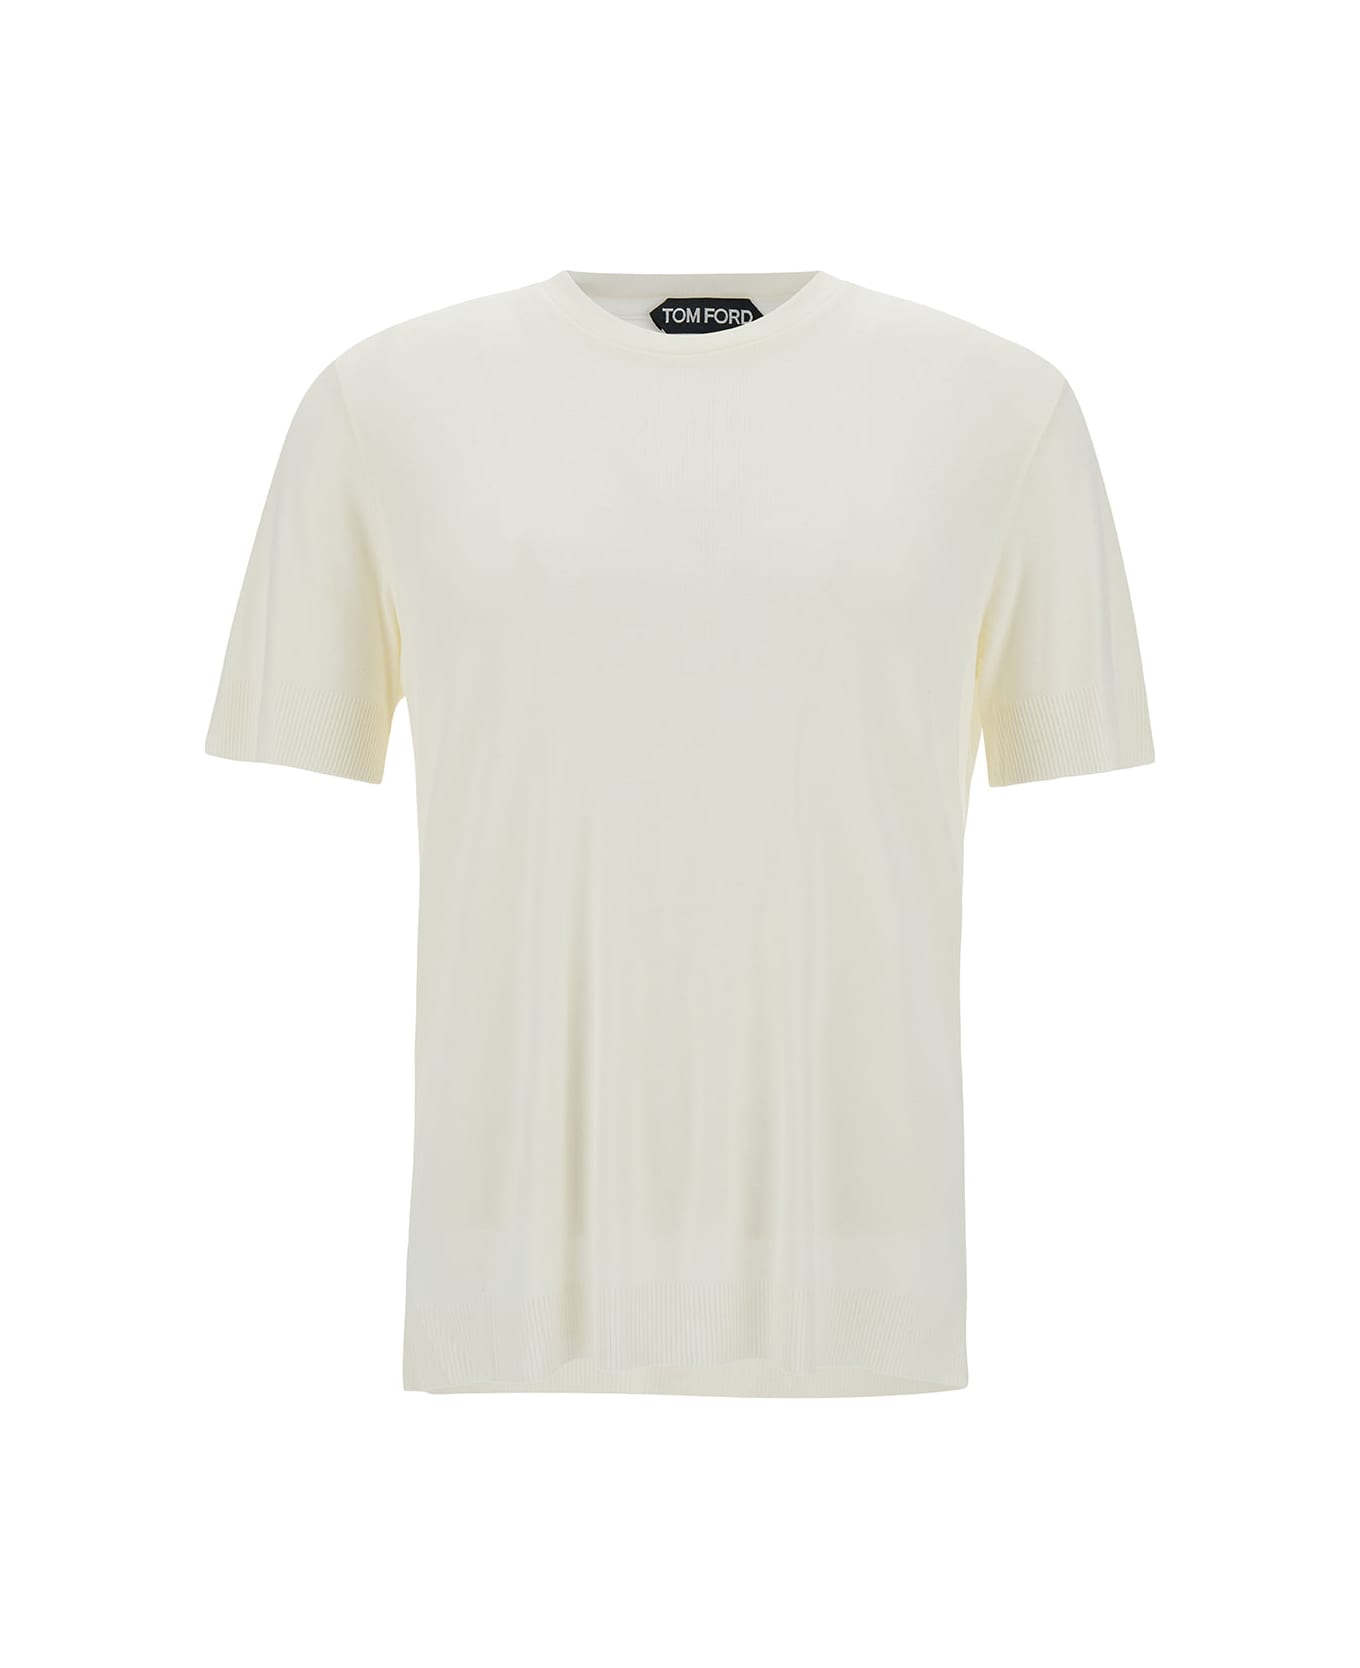 Tom Ford White Crewneck T-shirt With Ribbed Trim In Lyocell Blend Man - White